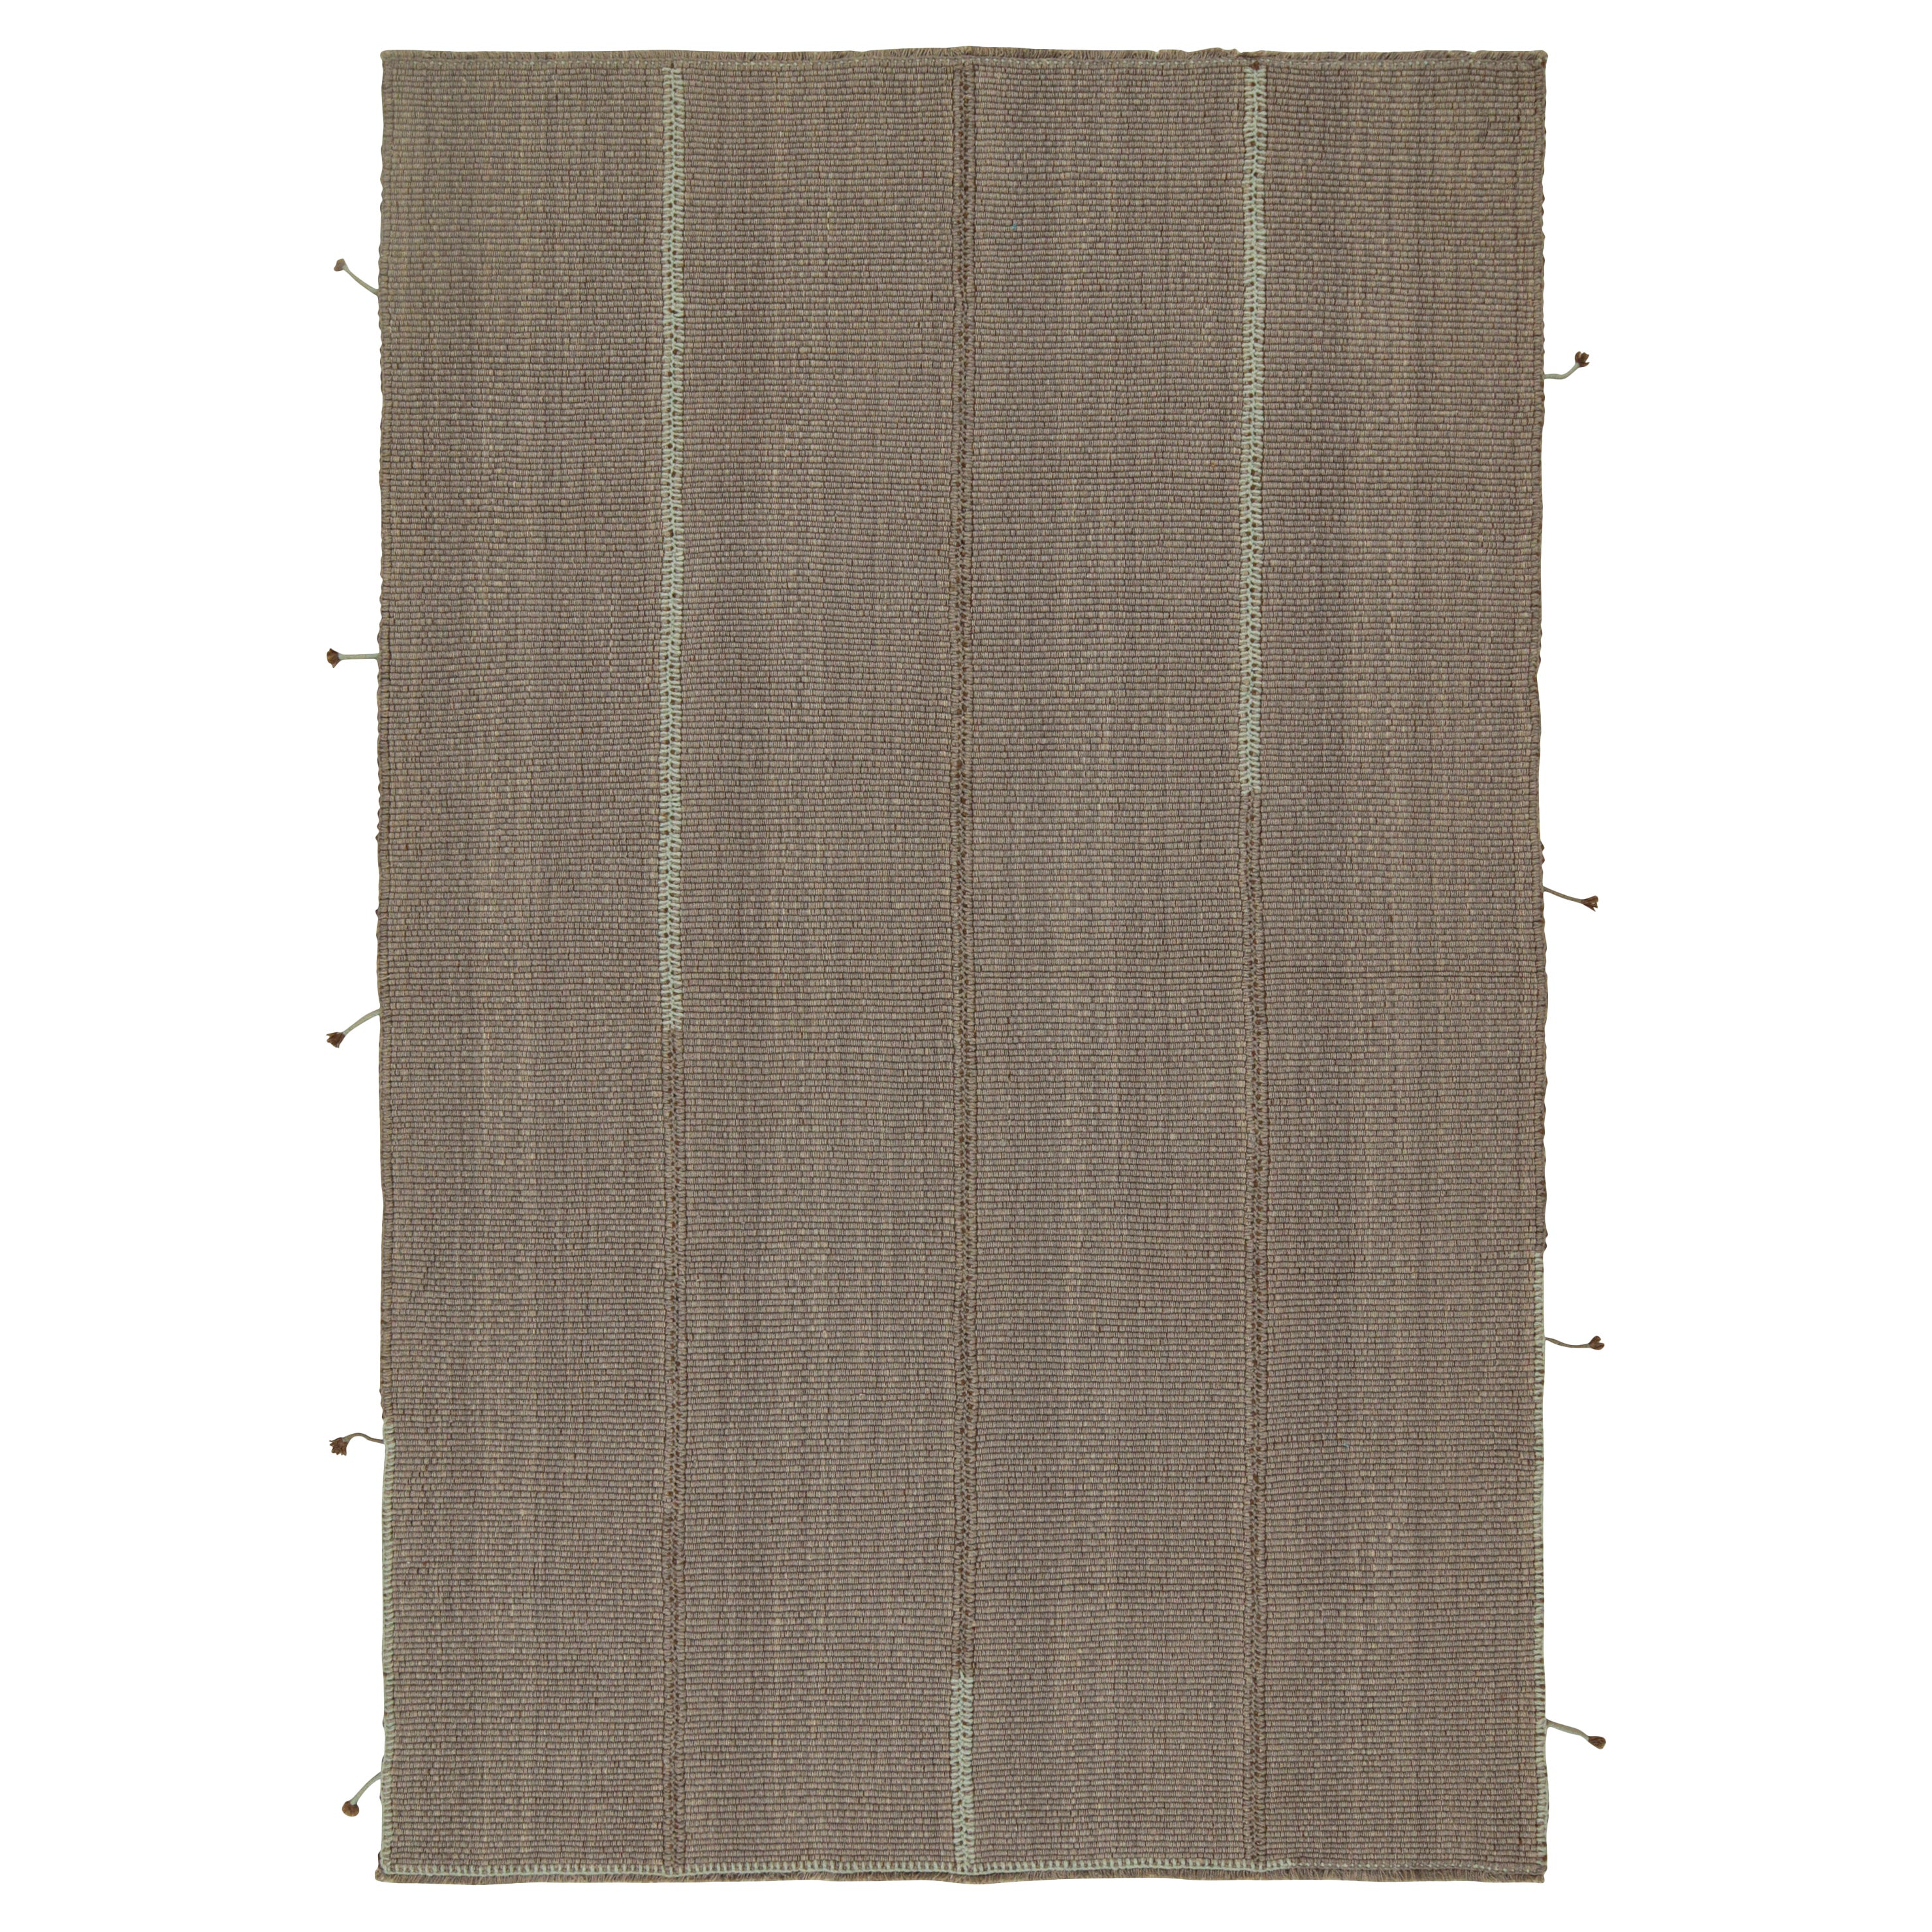 Rug & Kilim’s Contemporary Kilim Rug in Grey with Brown and Blue Accents For Sale